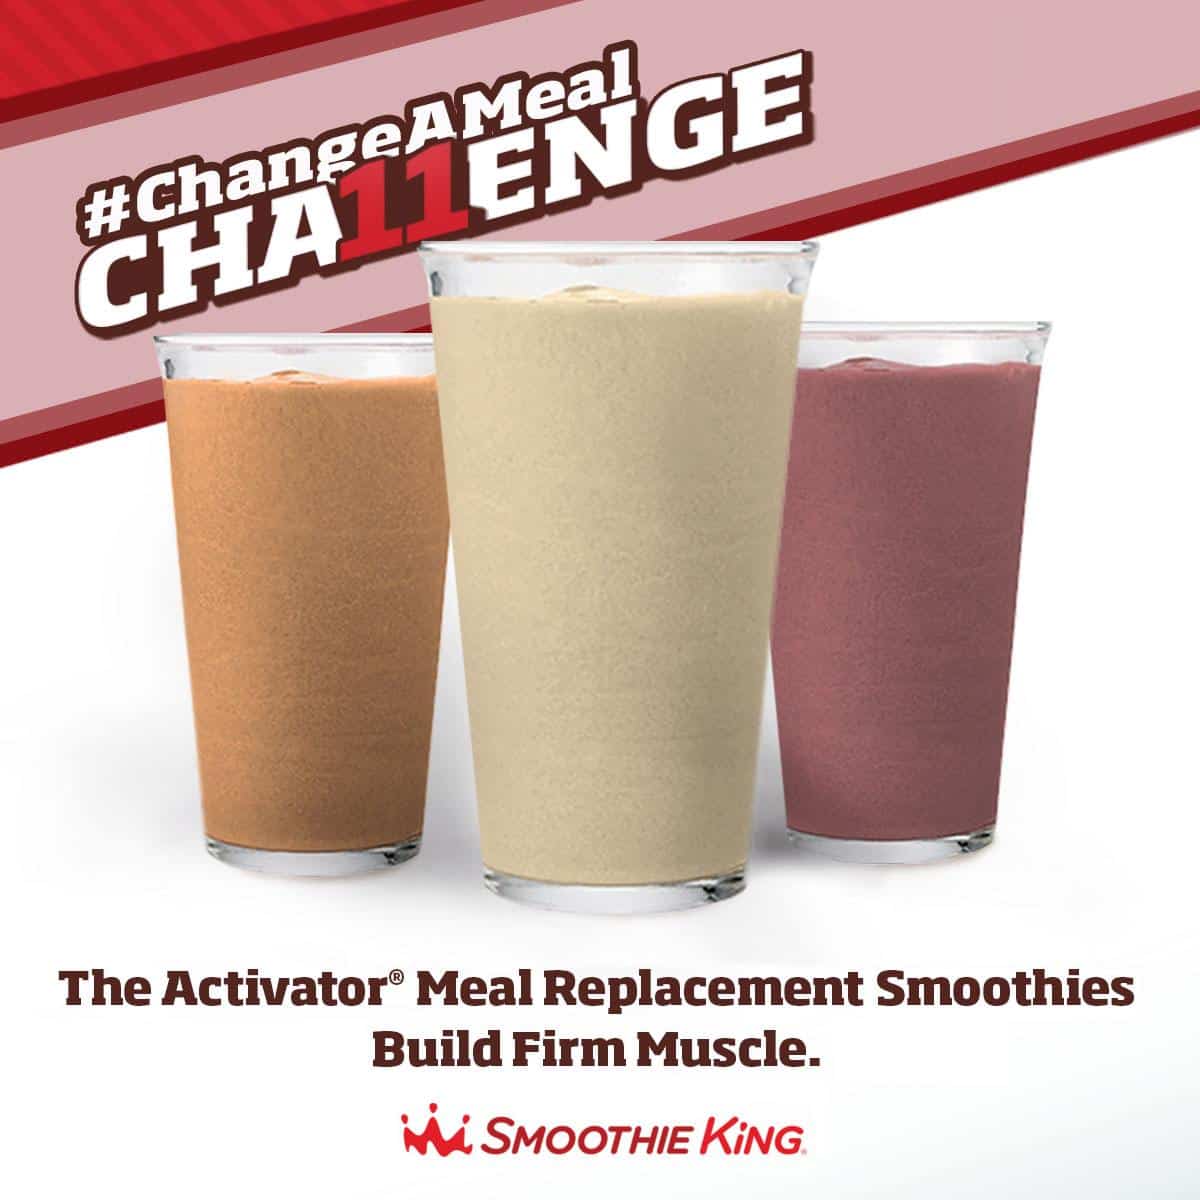 Smoothie King on Twitter: " The Activator #Smoothie features Gladiator ...